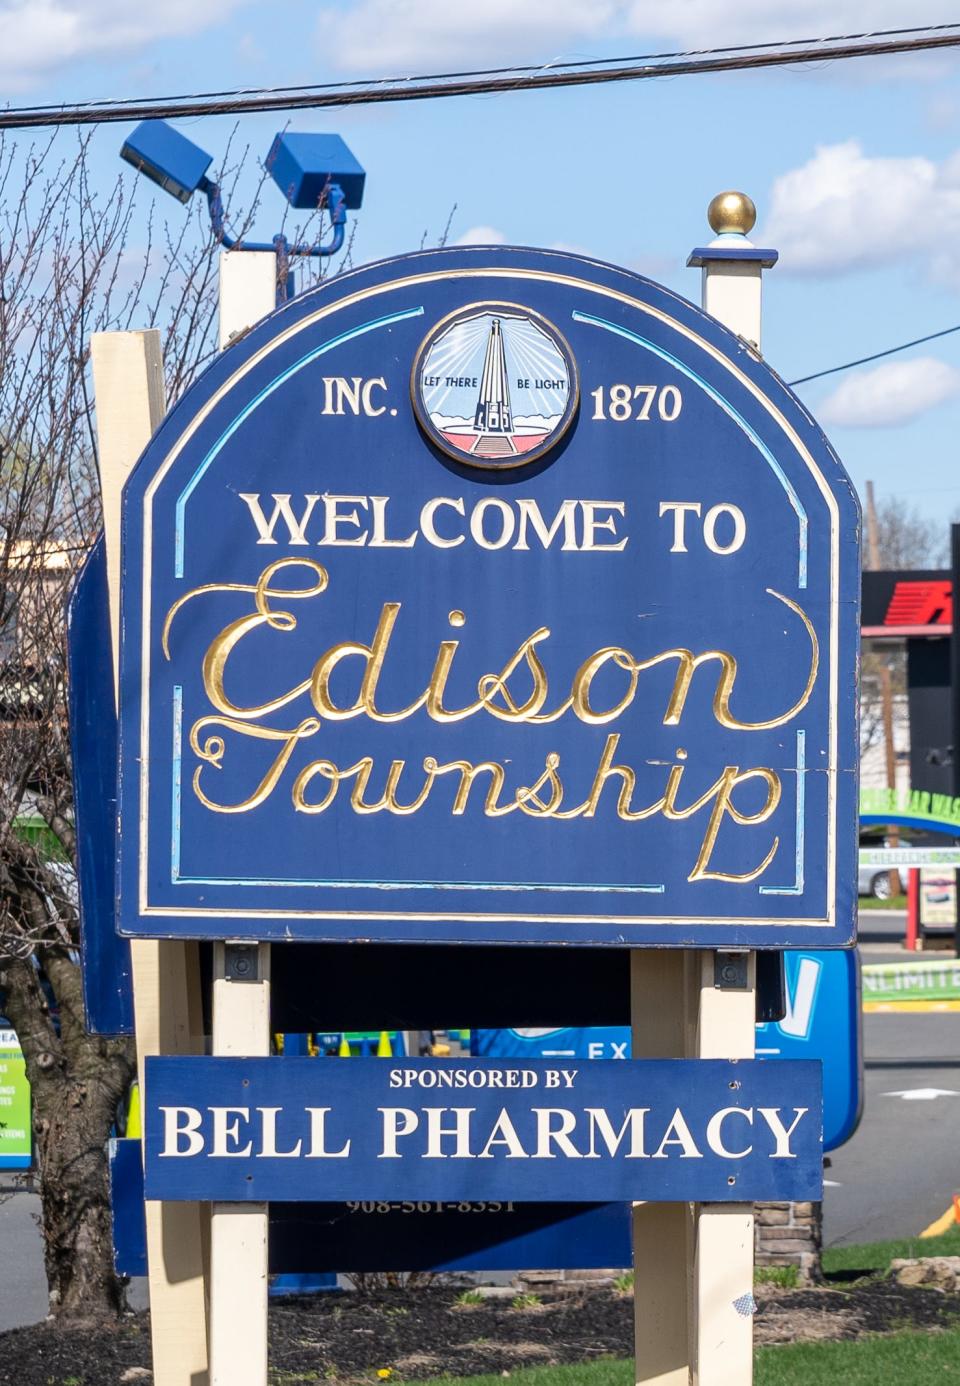 Plans to create the position of public advocate in Edison will continue in 2023